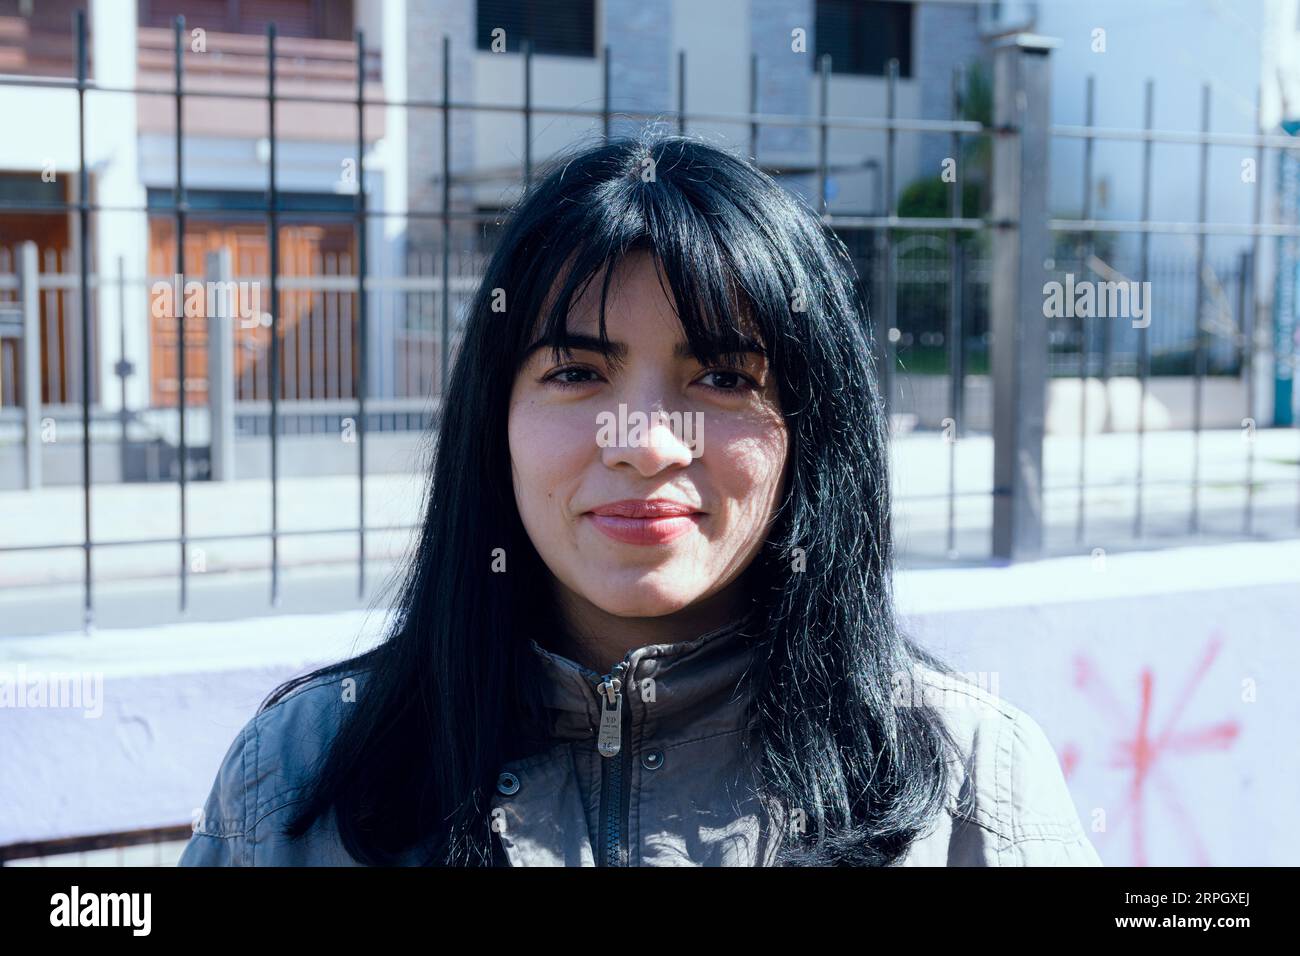 portrait of young venezuelan latina woman with black hair with bangs, wearing jacket for cold, standing outdoors at sunset looking at camera happily. Stock Photo